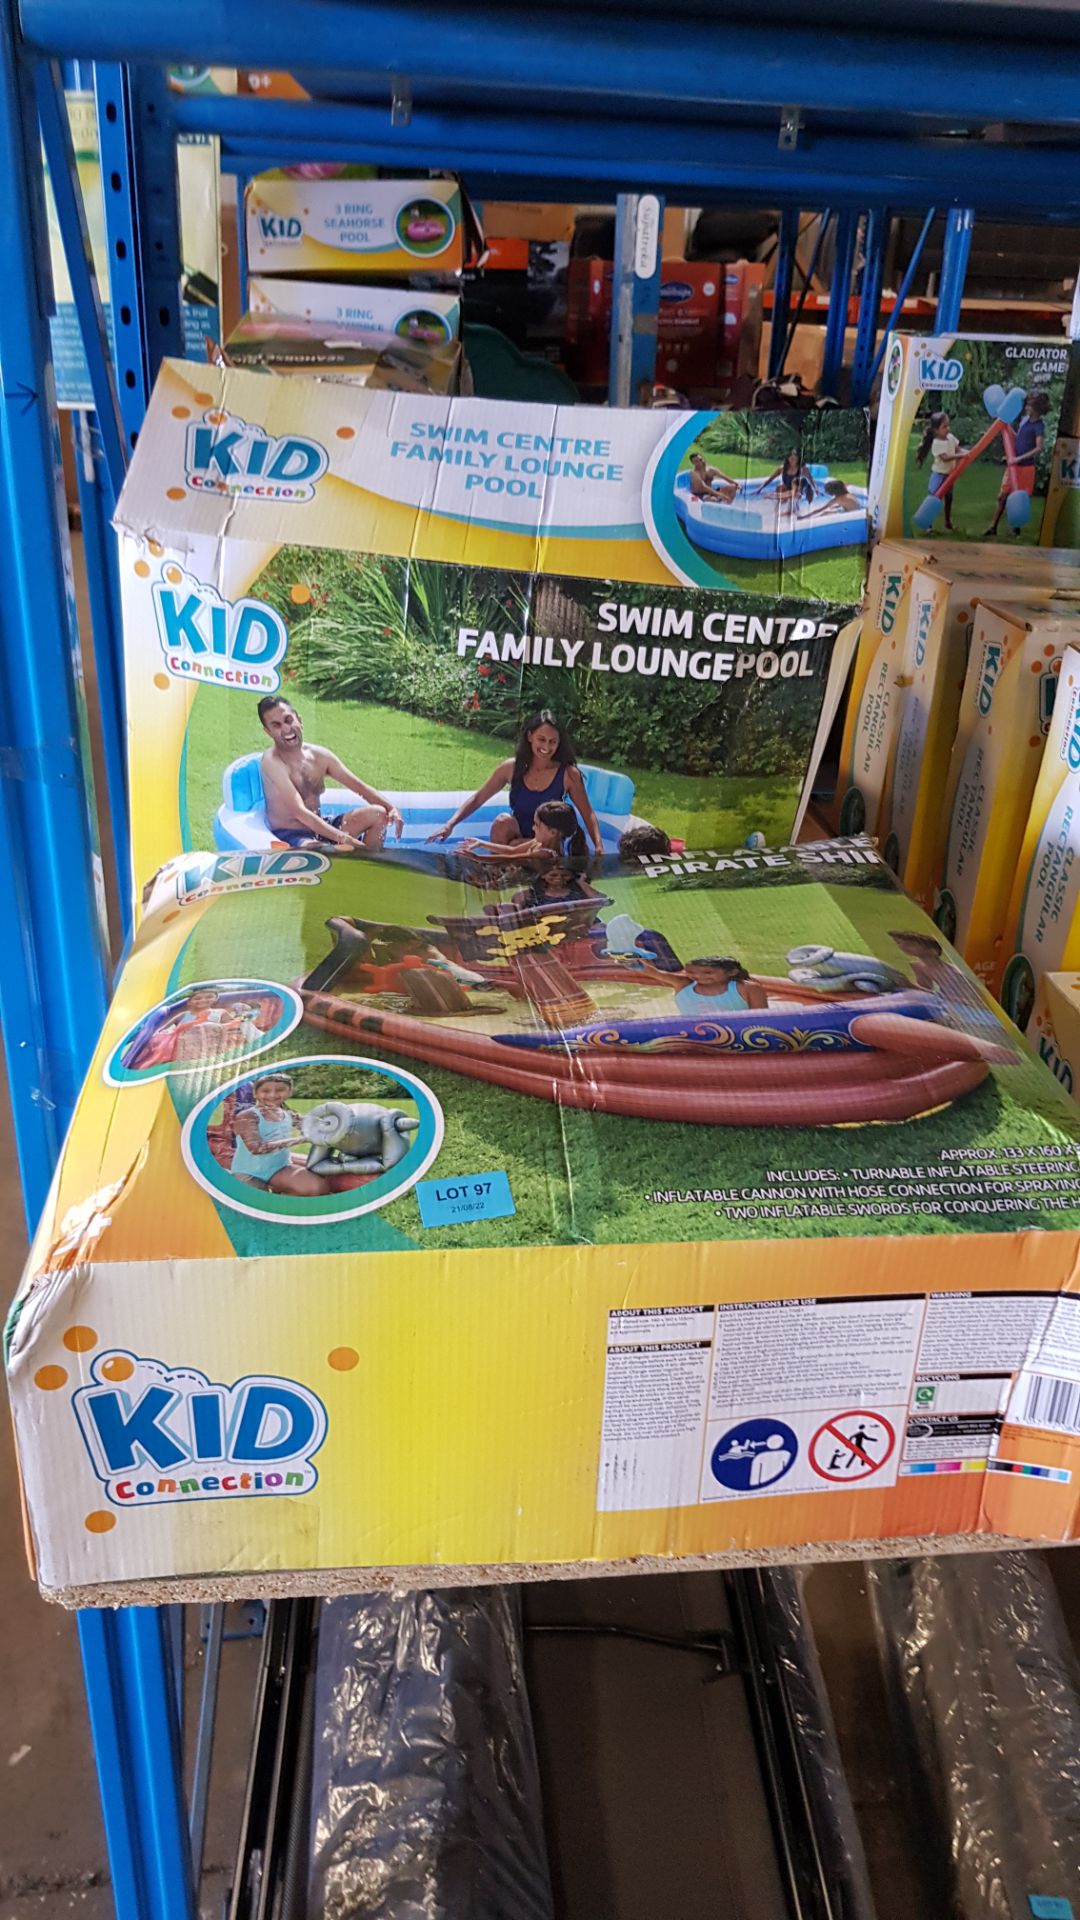 (97/6H) Lot RRP £120. 3x Kid Connection Swim Centre Family Lounge Pool RRP £40 Each. Dimensions:... - Image 5 of 5